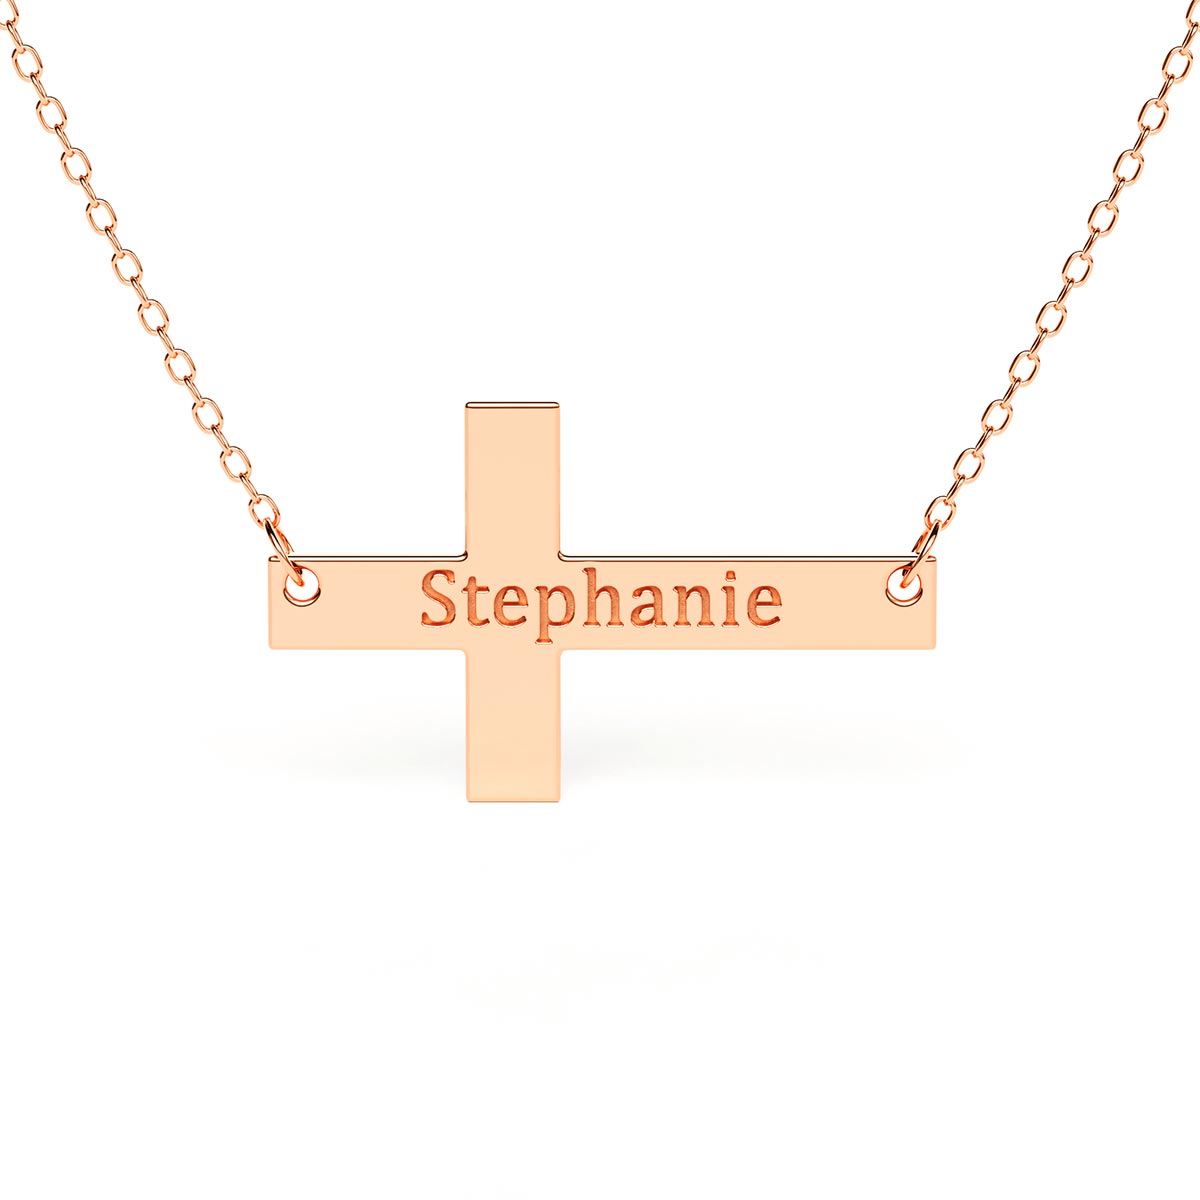 Sideways Cross Necklace With Engraving